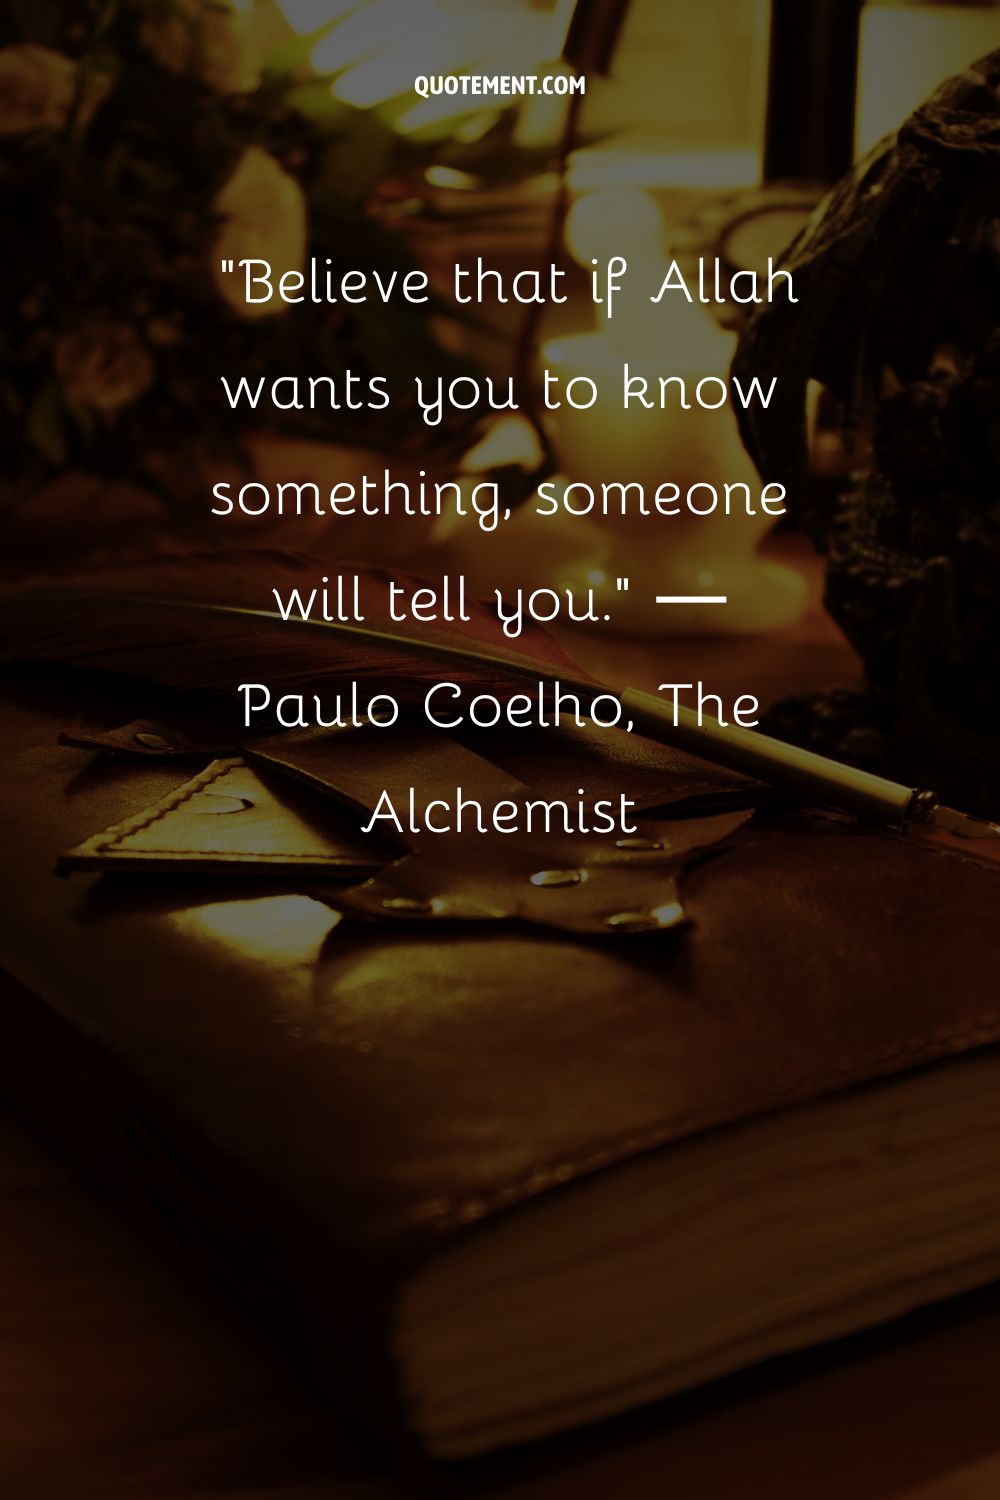 Believe that if Allah wants you to know something, someone will tell you